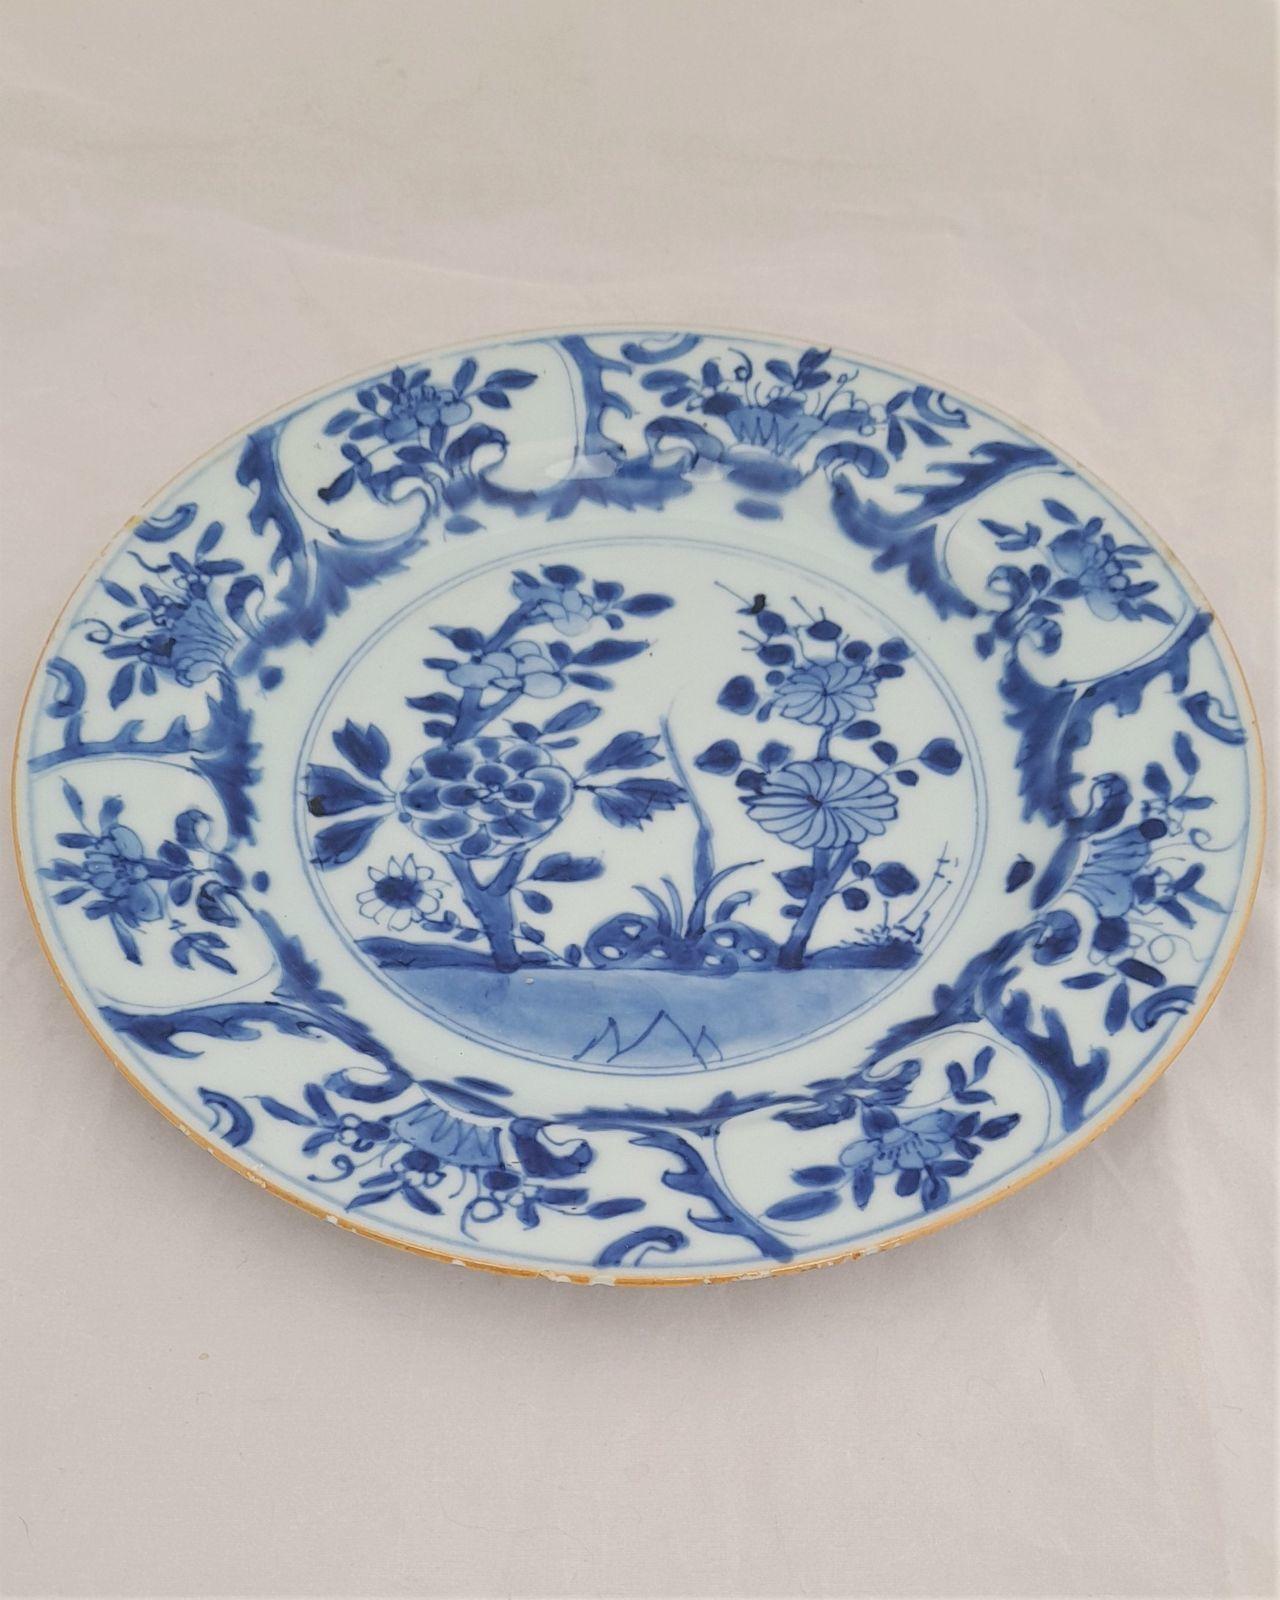 An antique Chinese export porcelain dinner plate hand painted in blue and white with a hollow blue rock peony and chrysanthemum pattern Kangxi period Qing dynasty early 18th Century